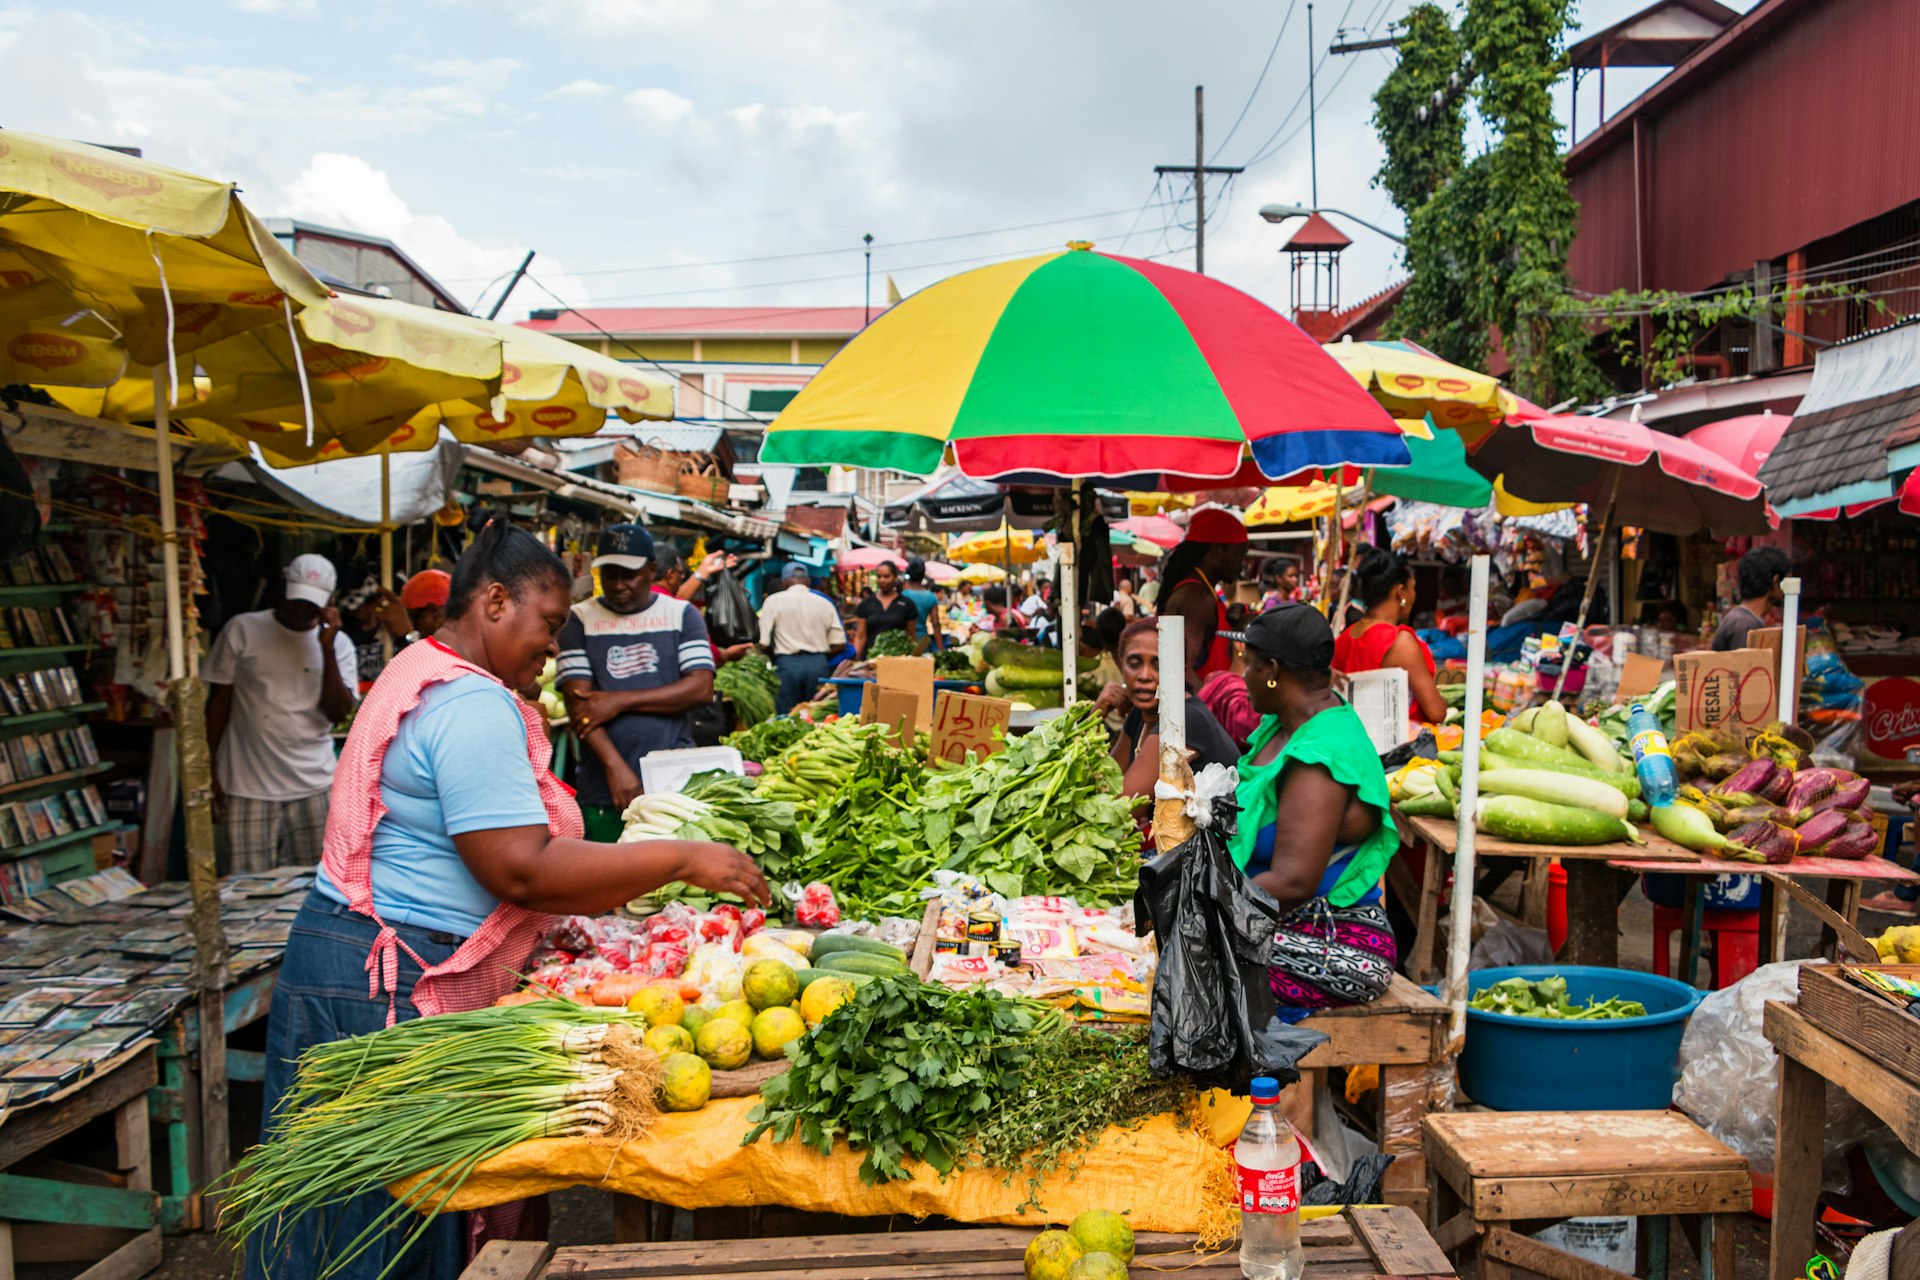 Vendors sell produce at Stabroek market in Georgetown, capital city of Guyana, South America